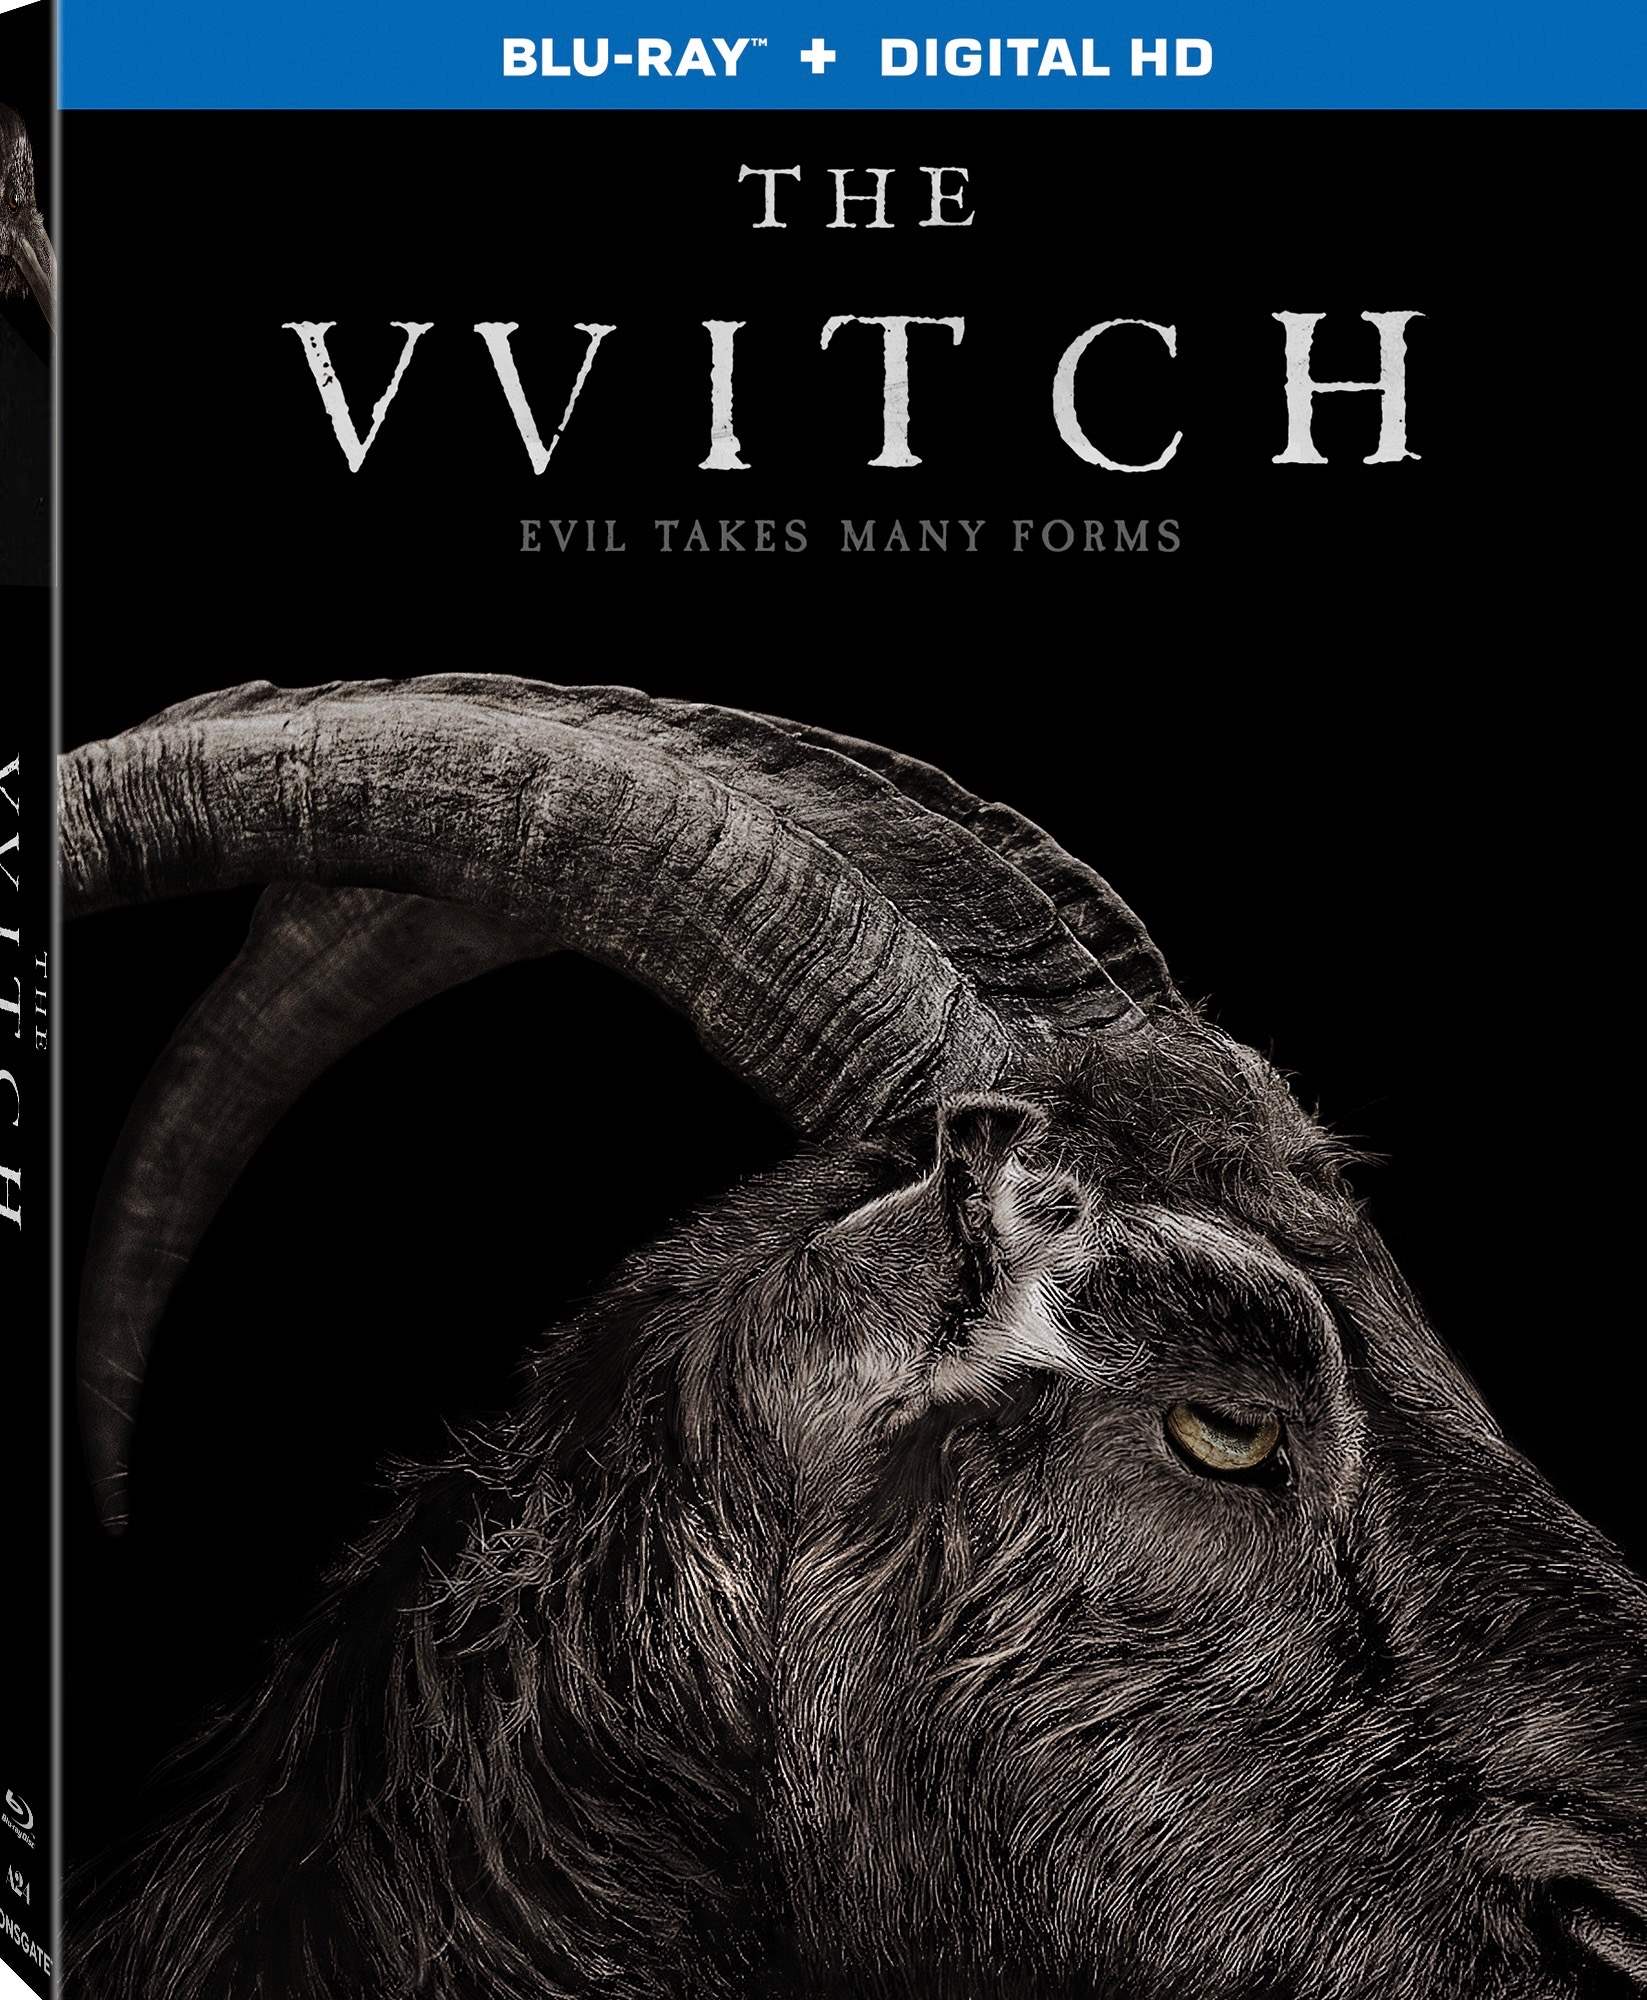 The Witch Blu-ray Art